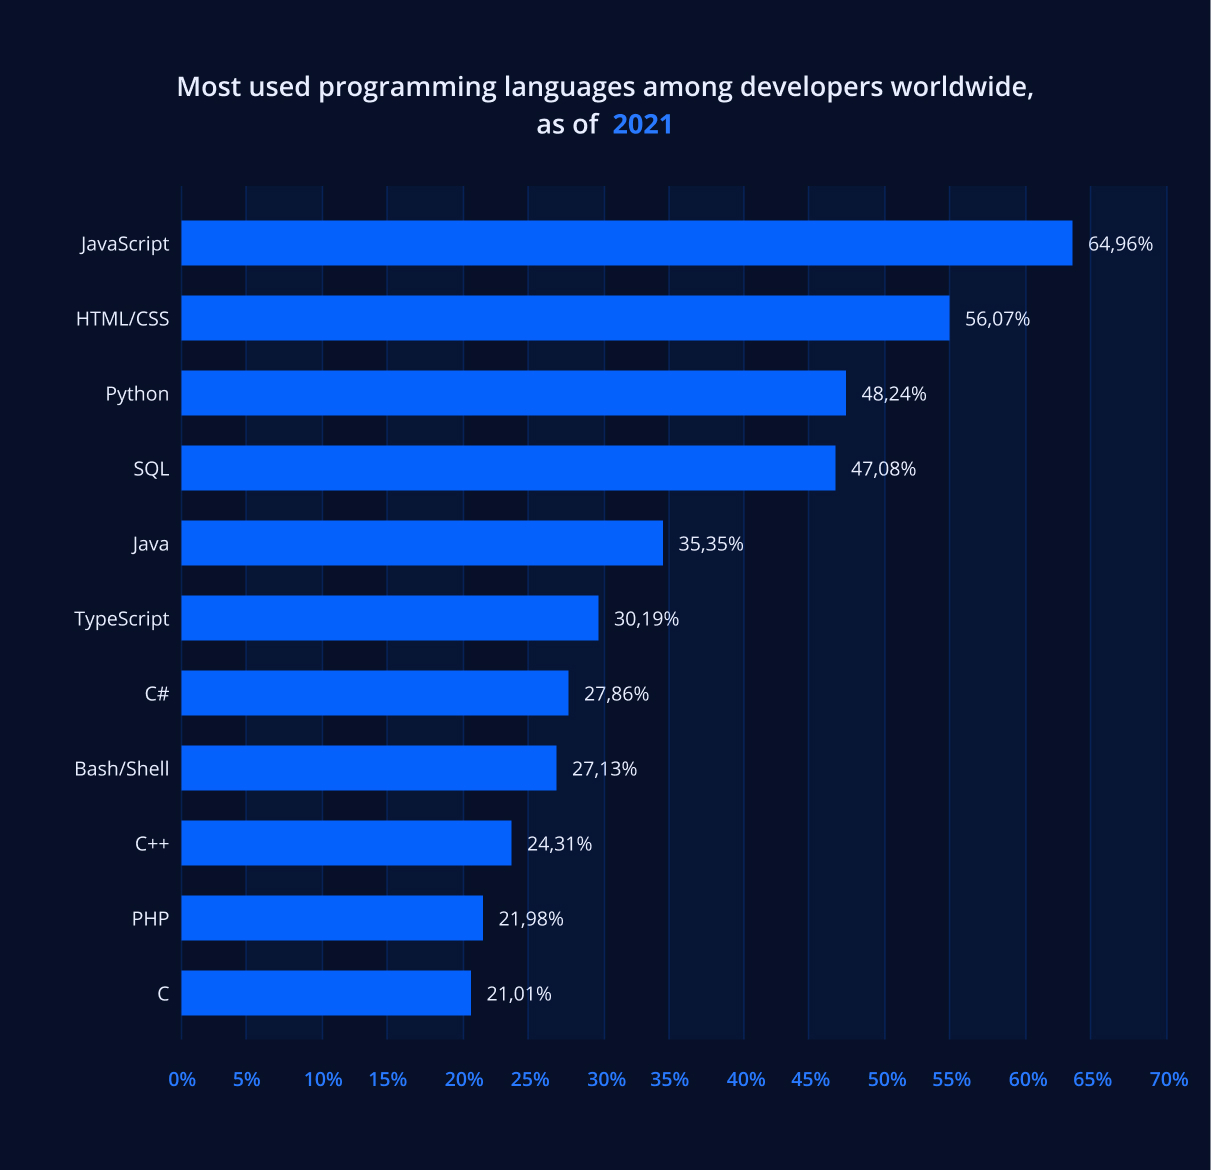 Most used programming languages in 2021